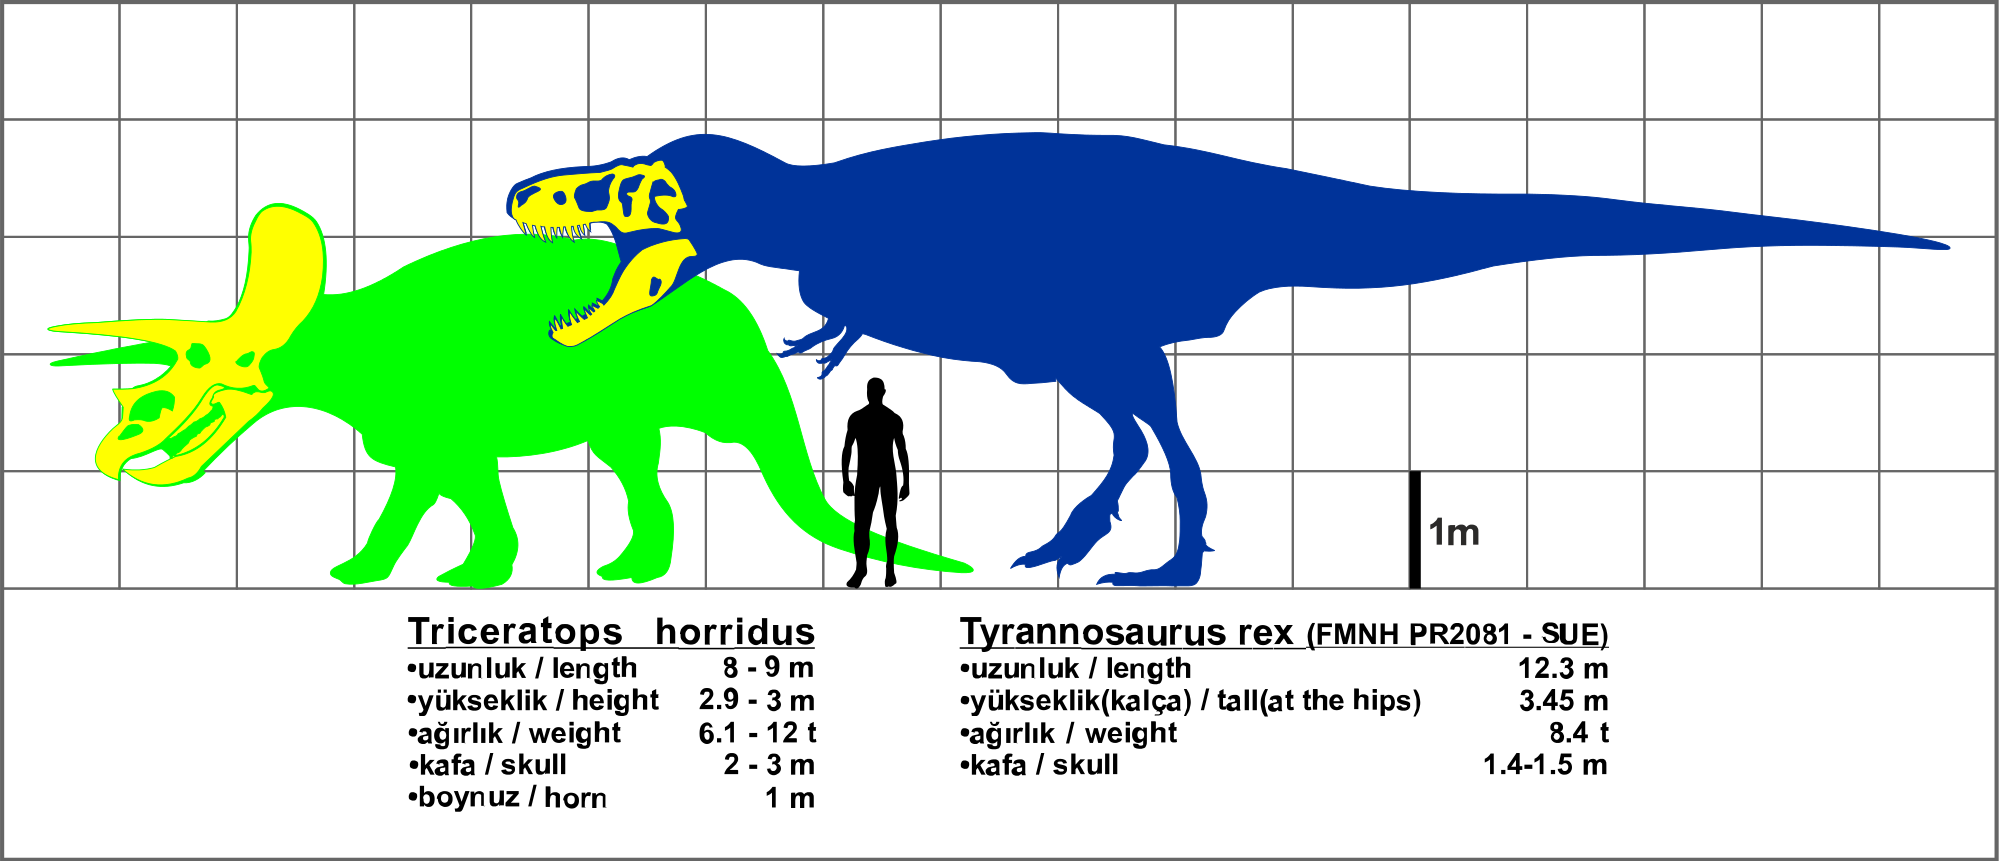 What is the triceratops position